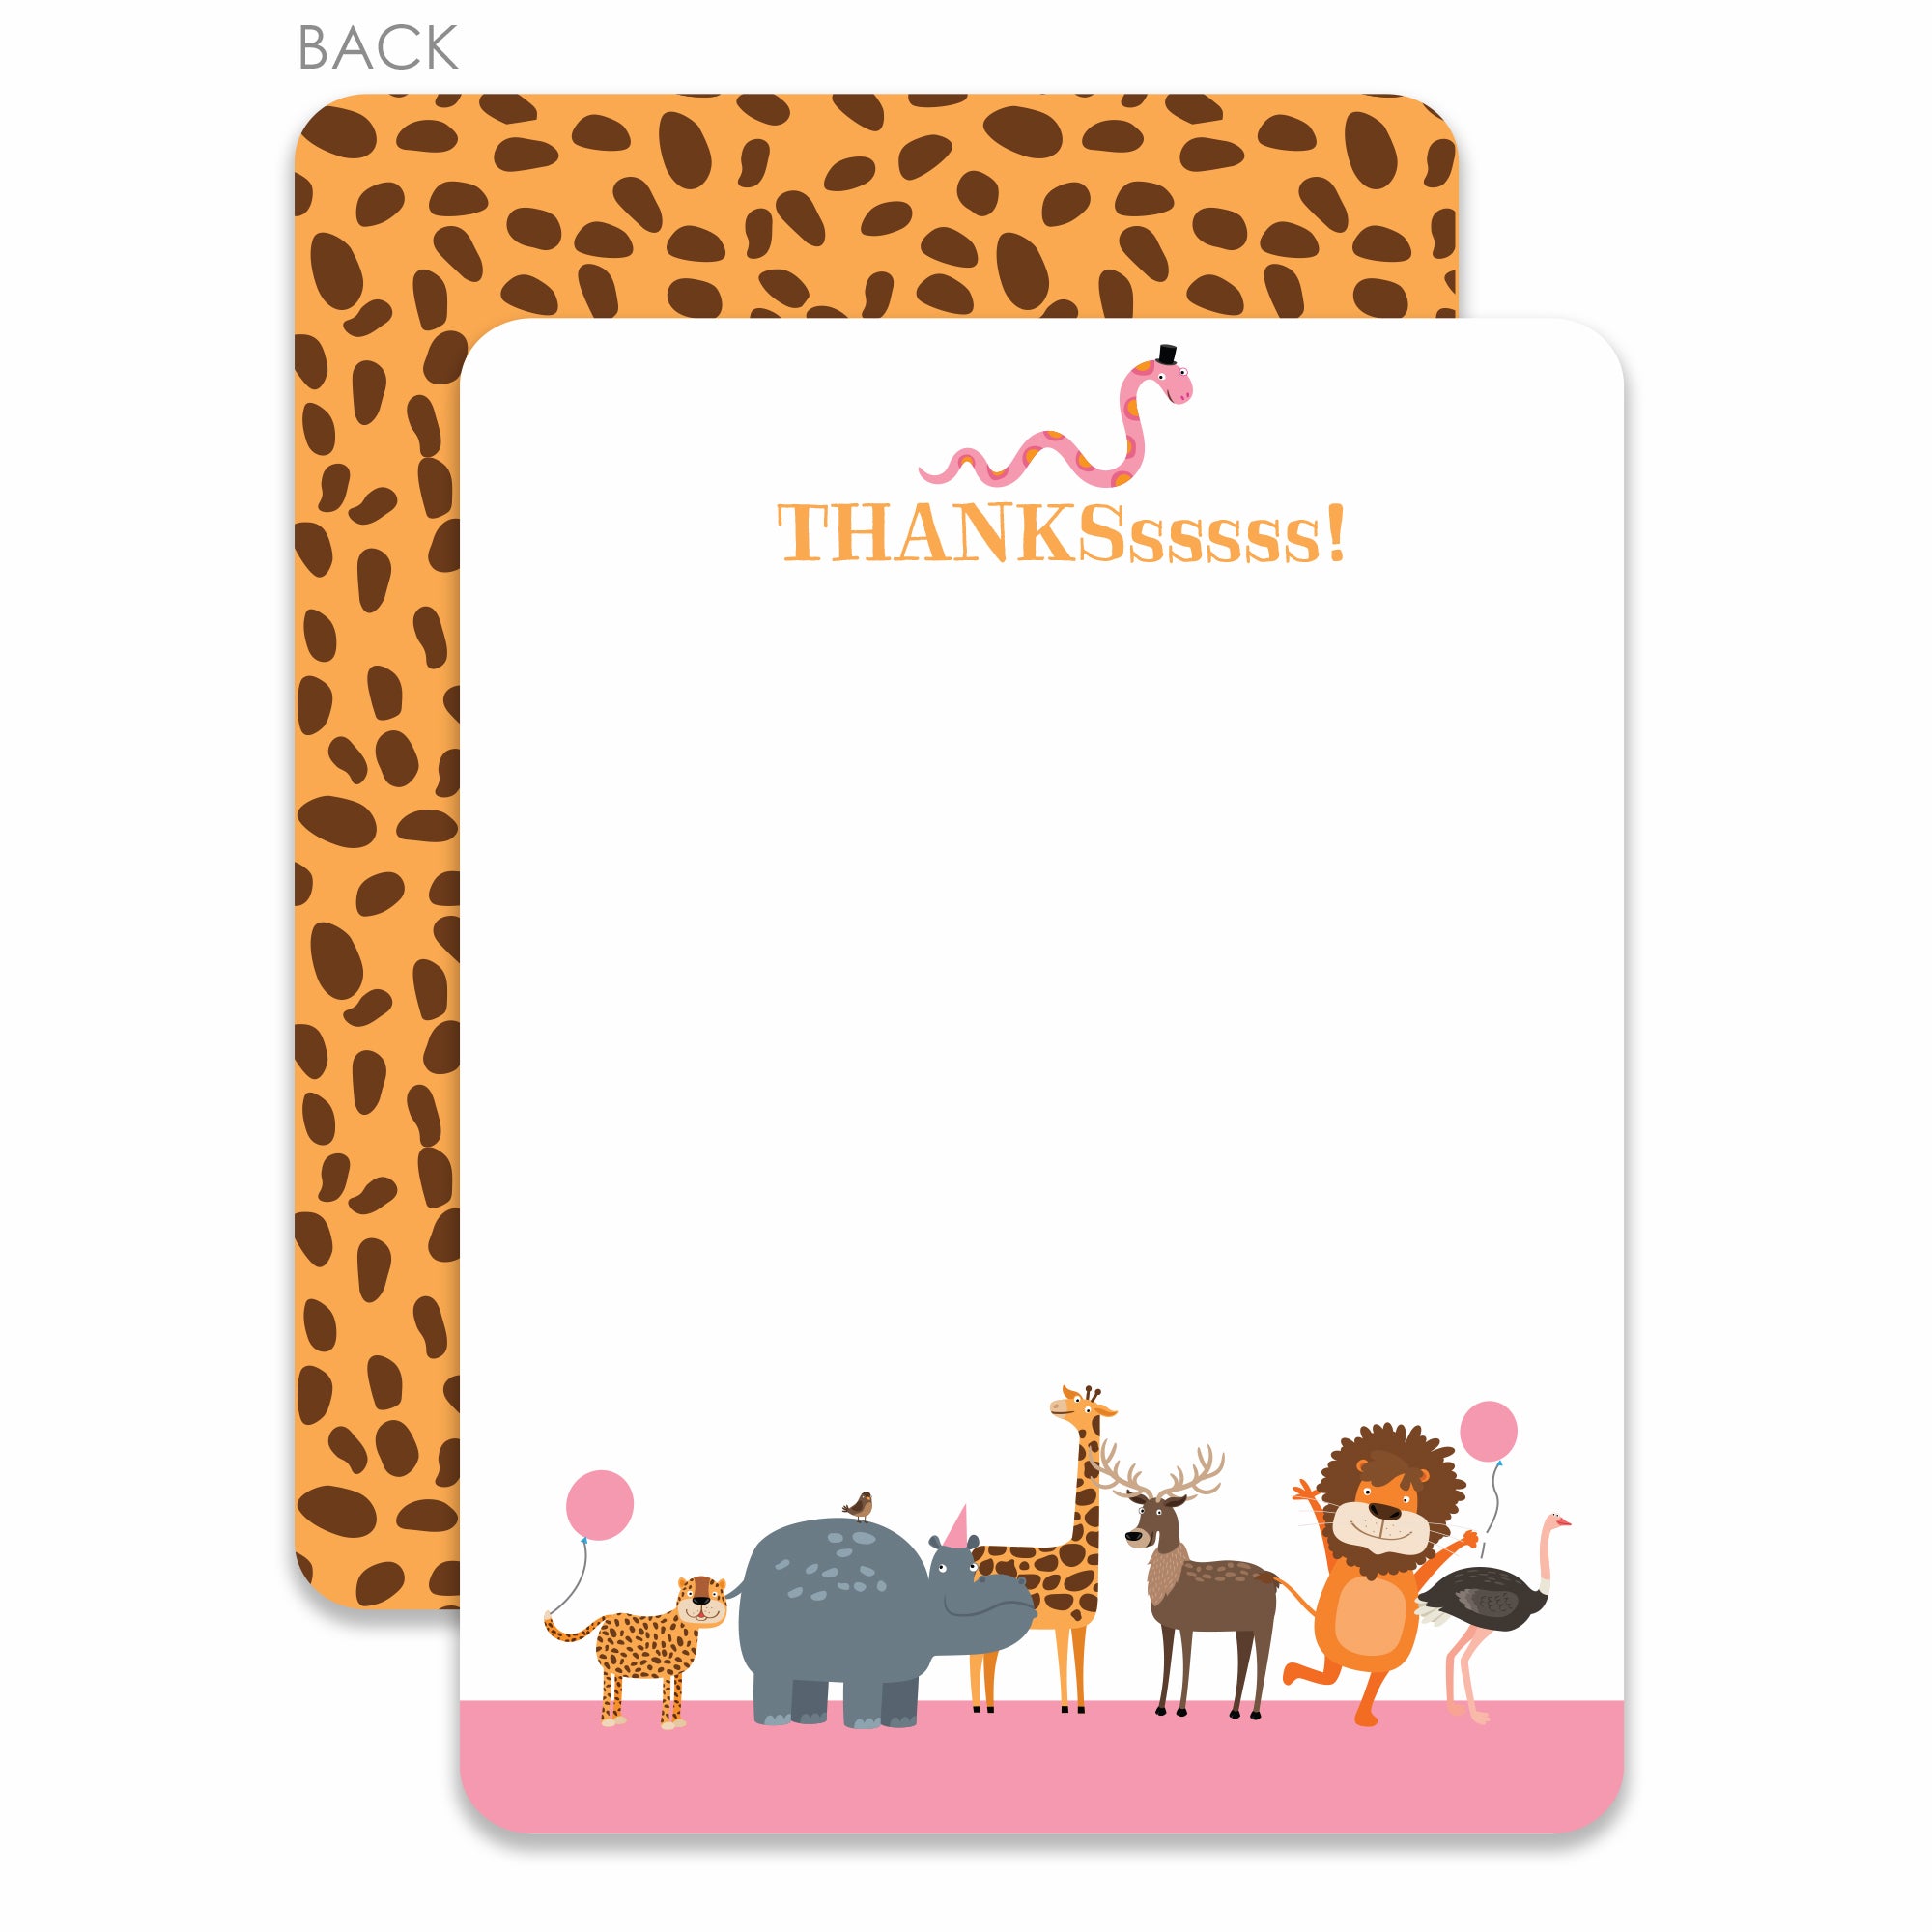 Party Animals Flat notecards stationery with a cheetah pattern on the back